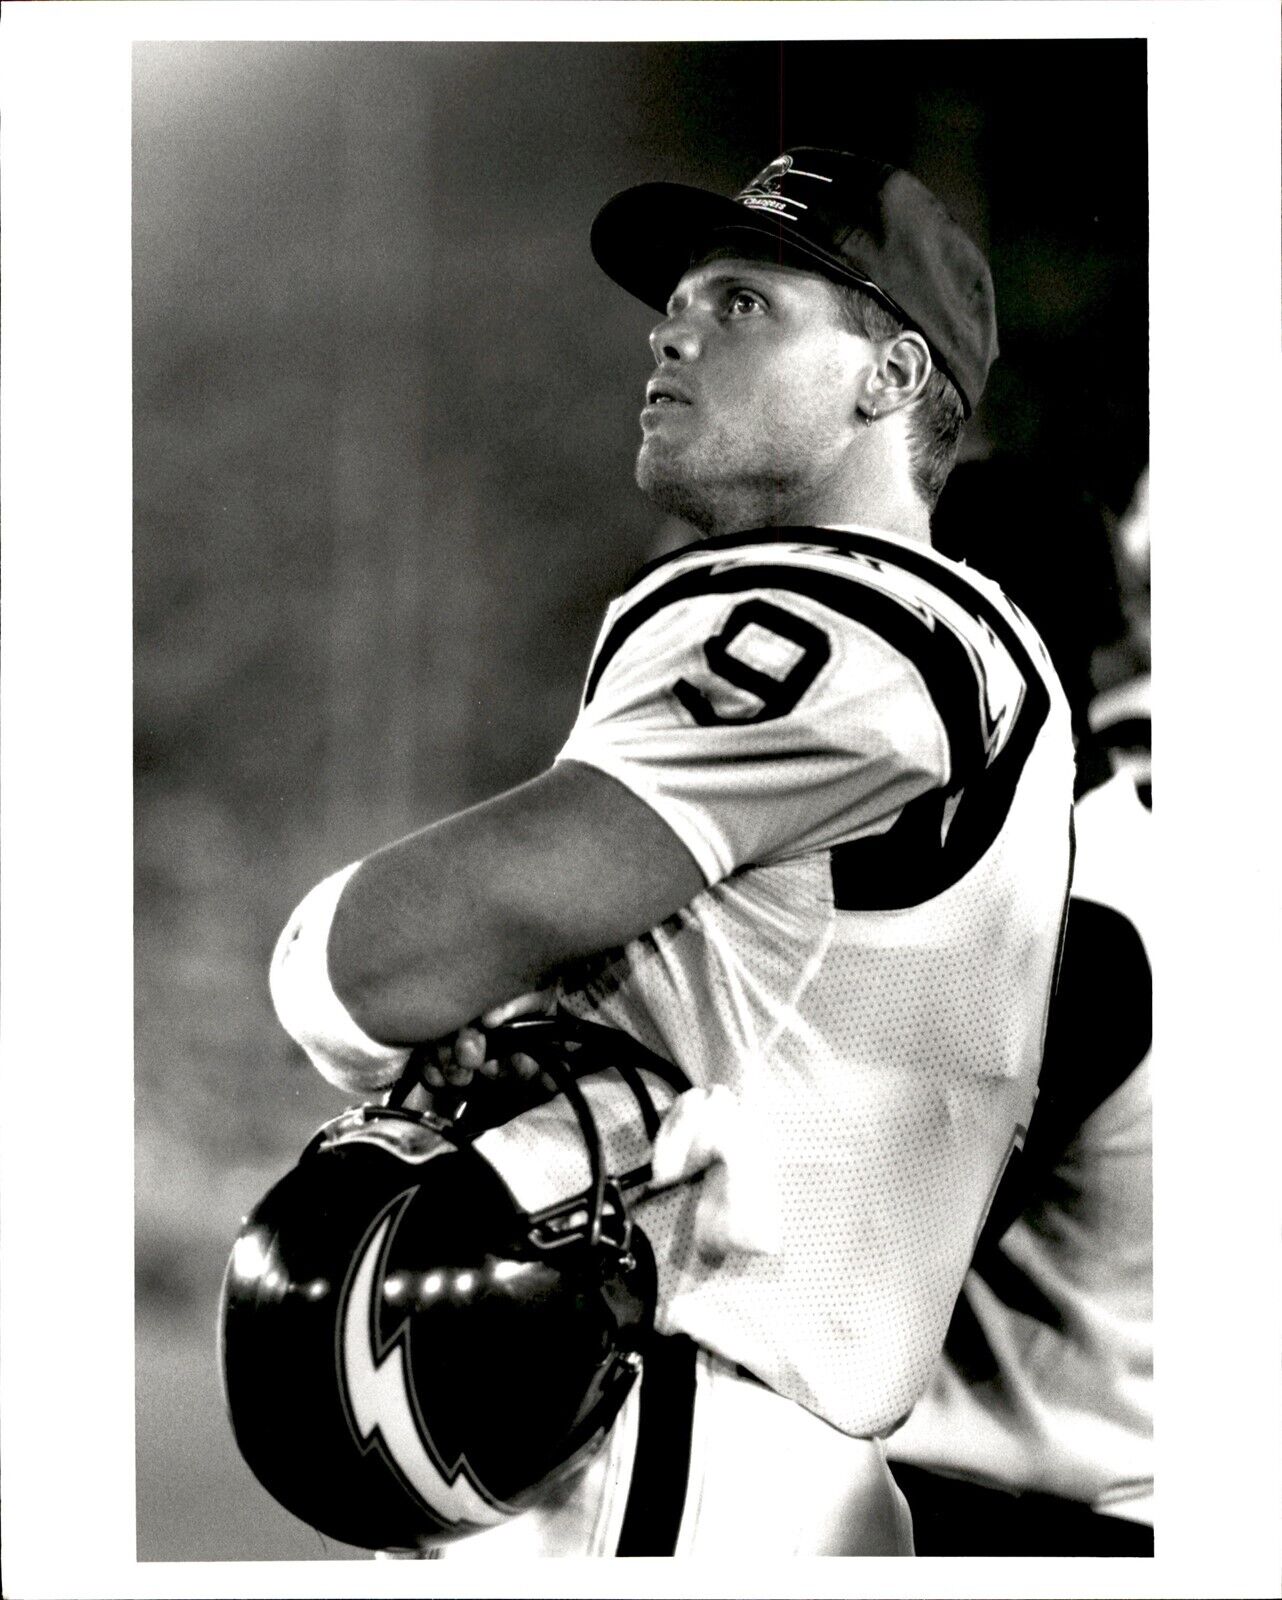 LD257 \'89 Original Ron Vesely Photo JIM MCMAHON SAN DIEGO CHARGERS CHICAGO BEARS